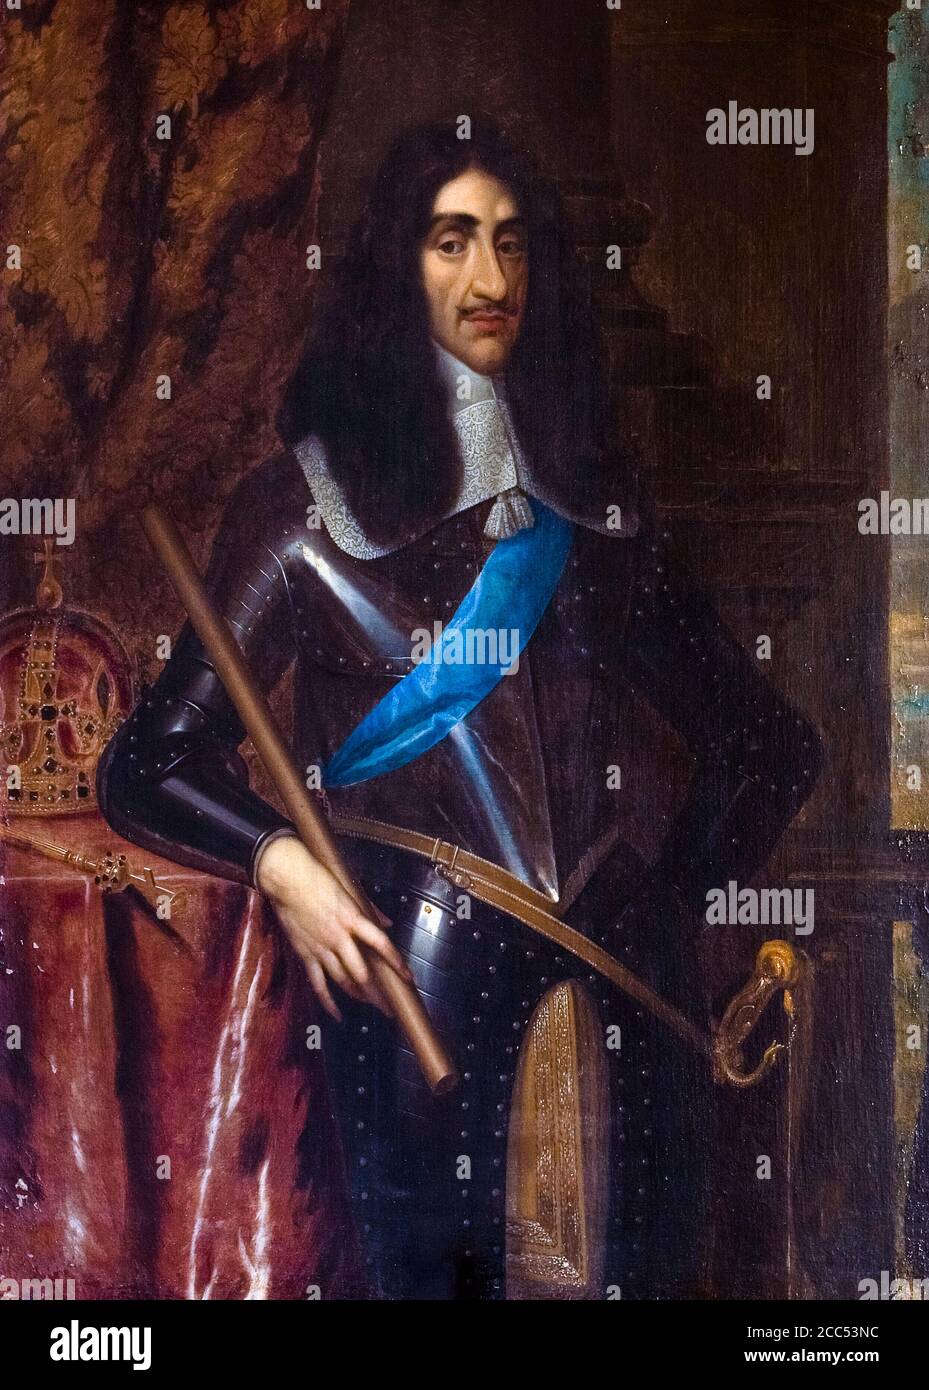 Charles I, (1600-1649), King of England, portrait painting by Simon Luttichys, 1661 Stock Photo